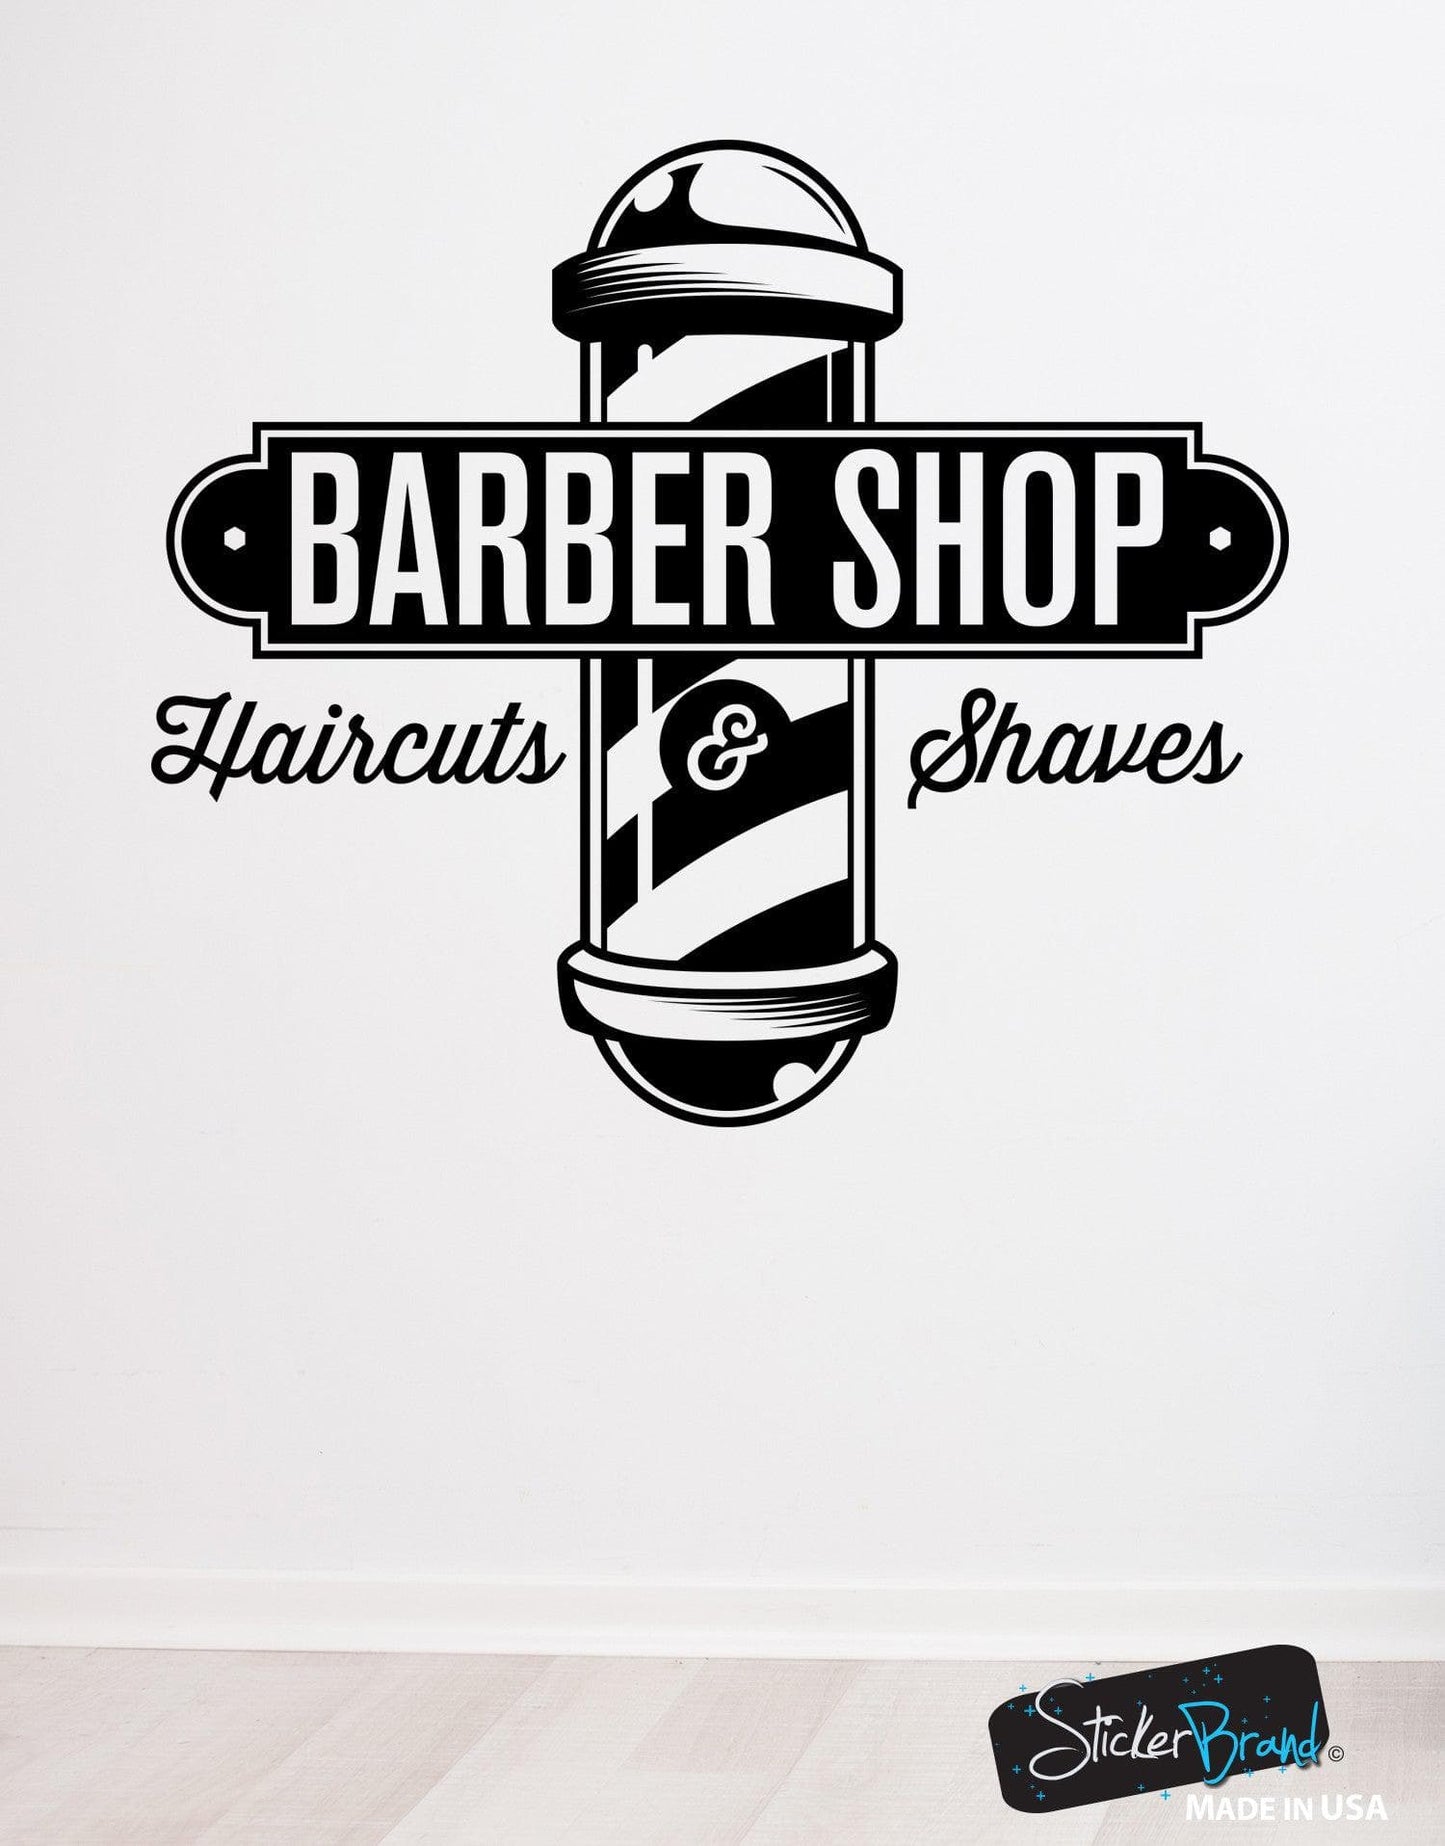 Barbershop Sign Haircuts and Shaves Vinyl Wall Decal Sticker #6066